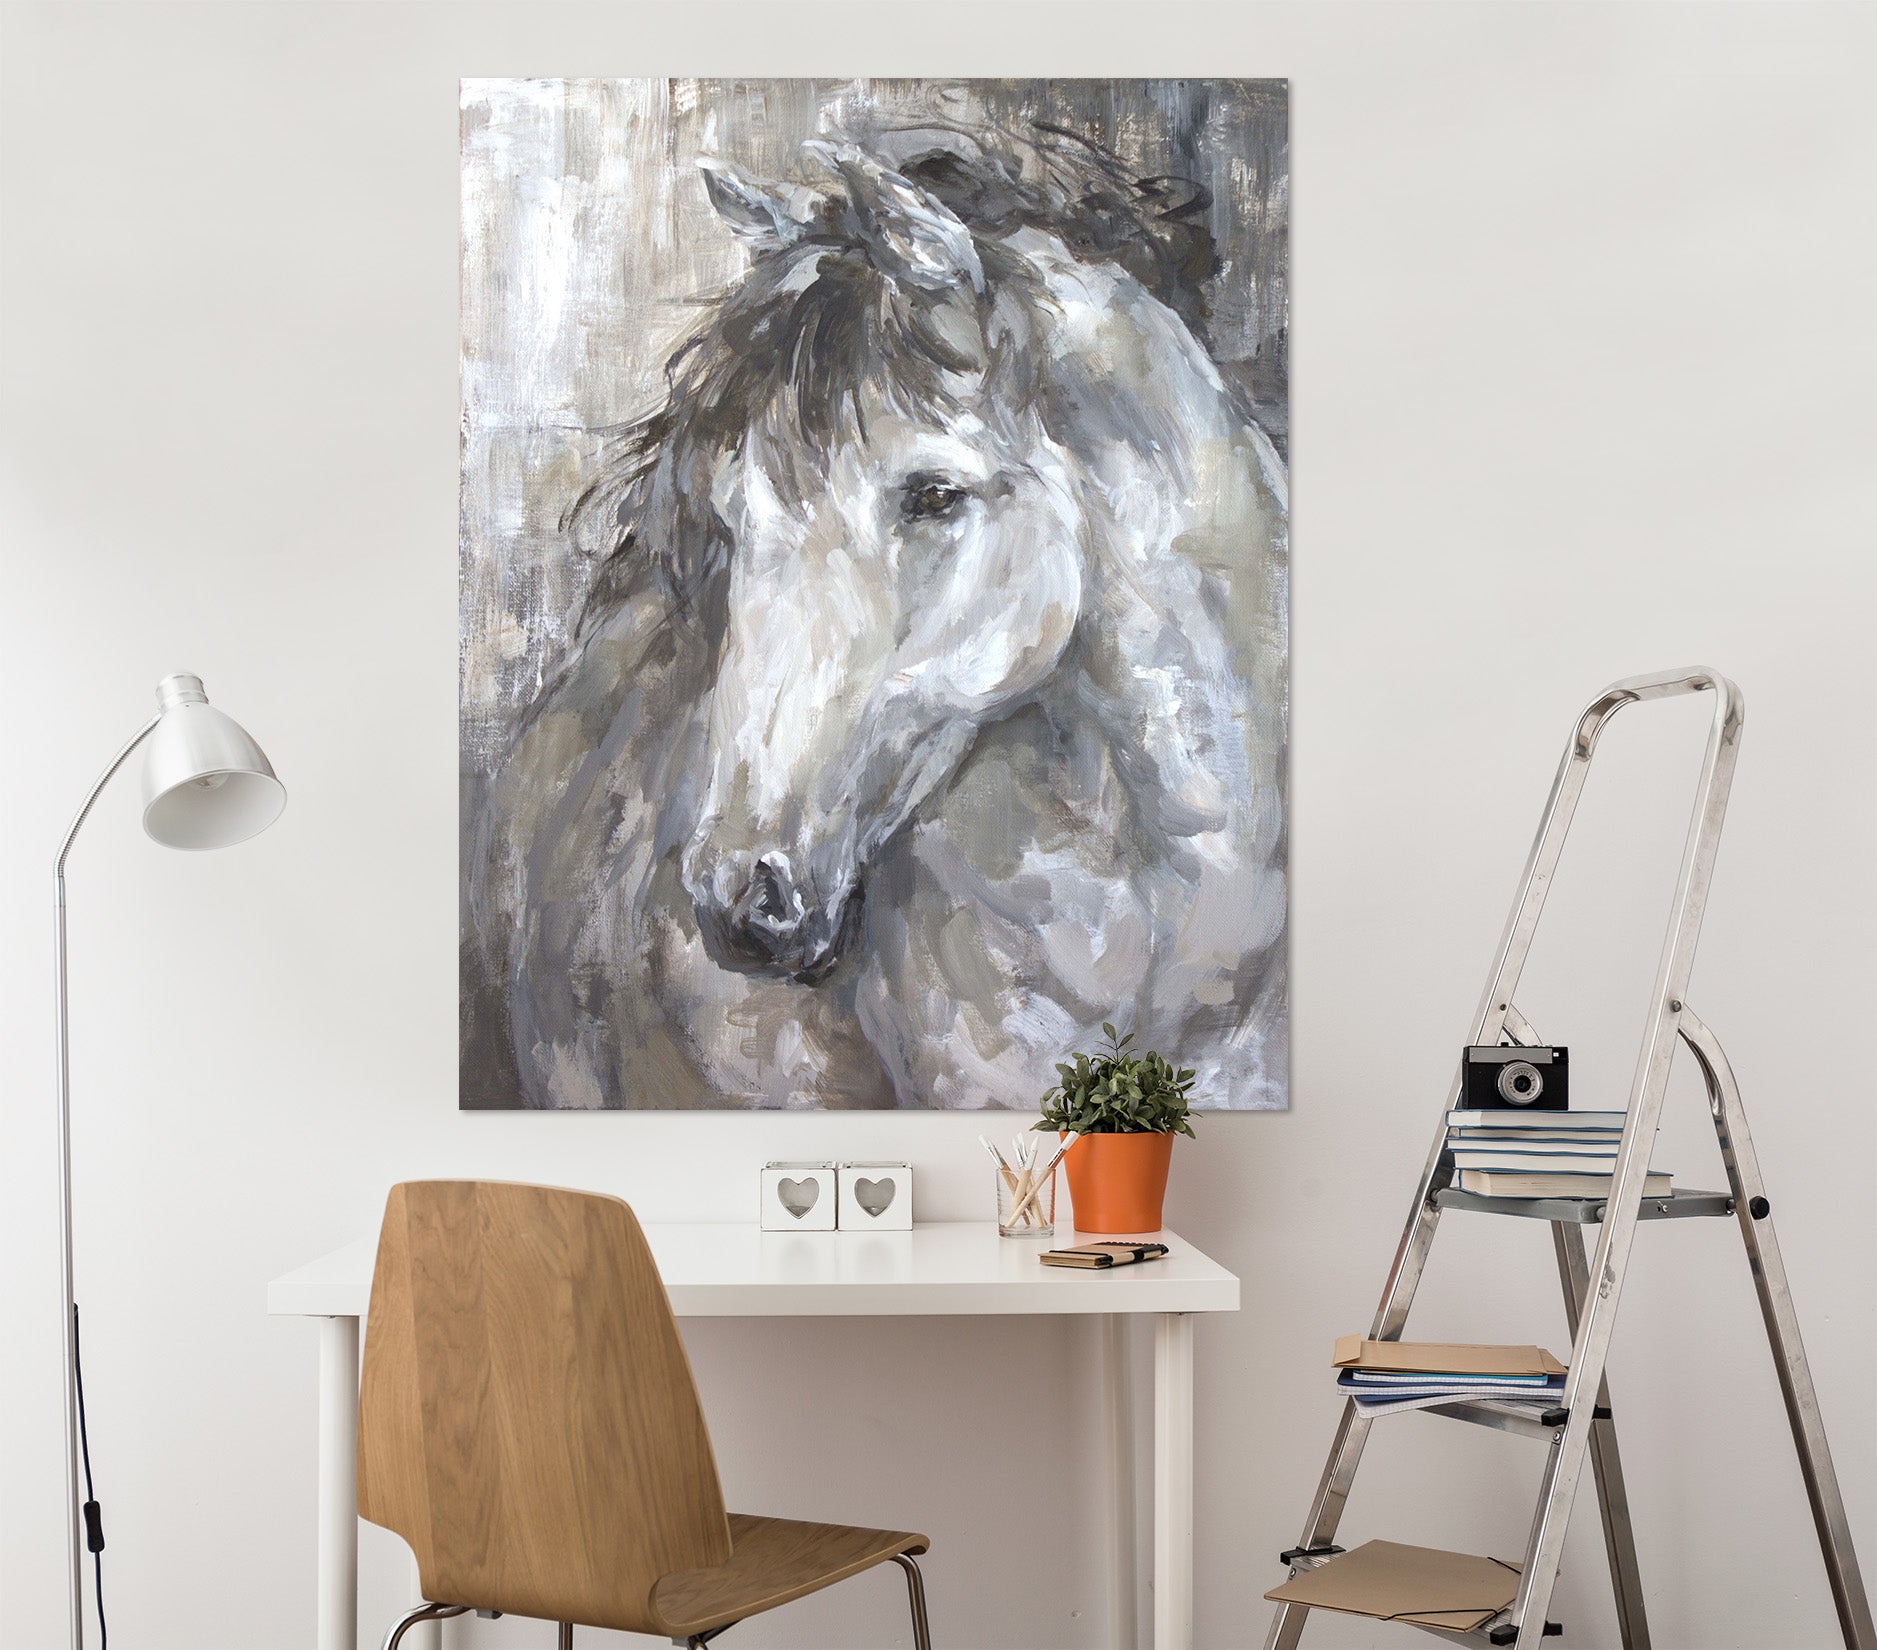 3D Painted Horse 017 Debi Coules Wall Sticker